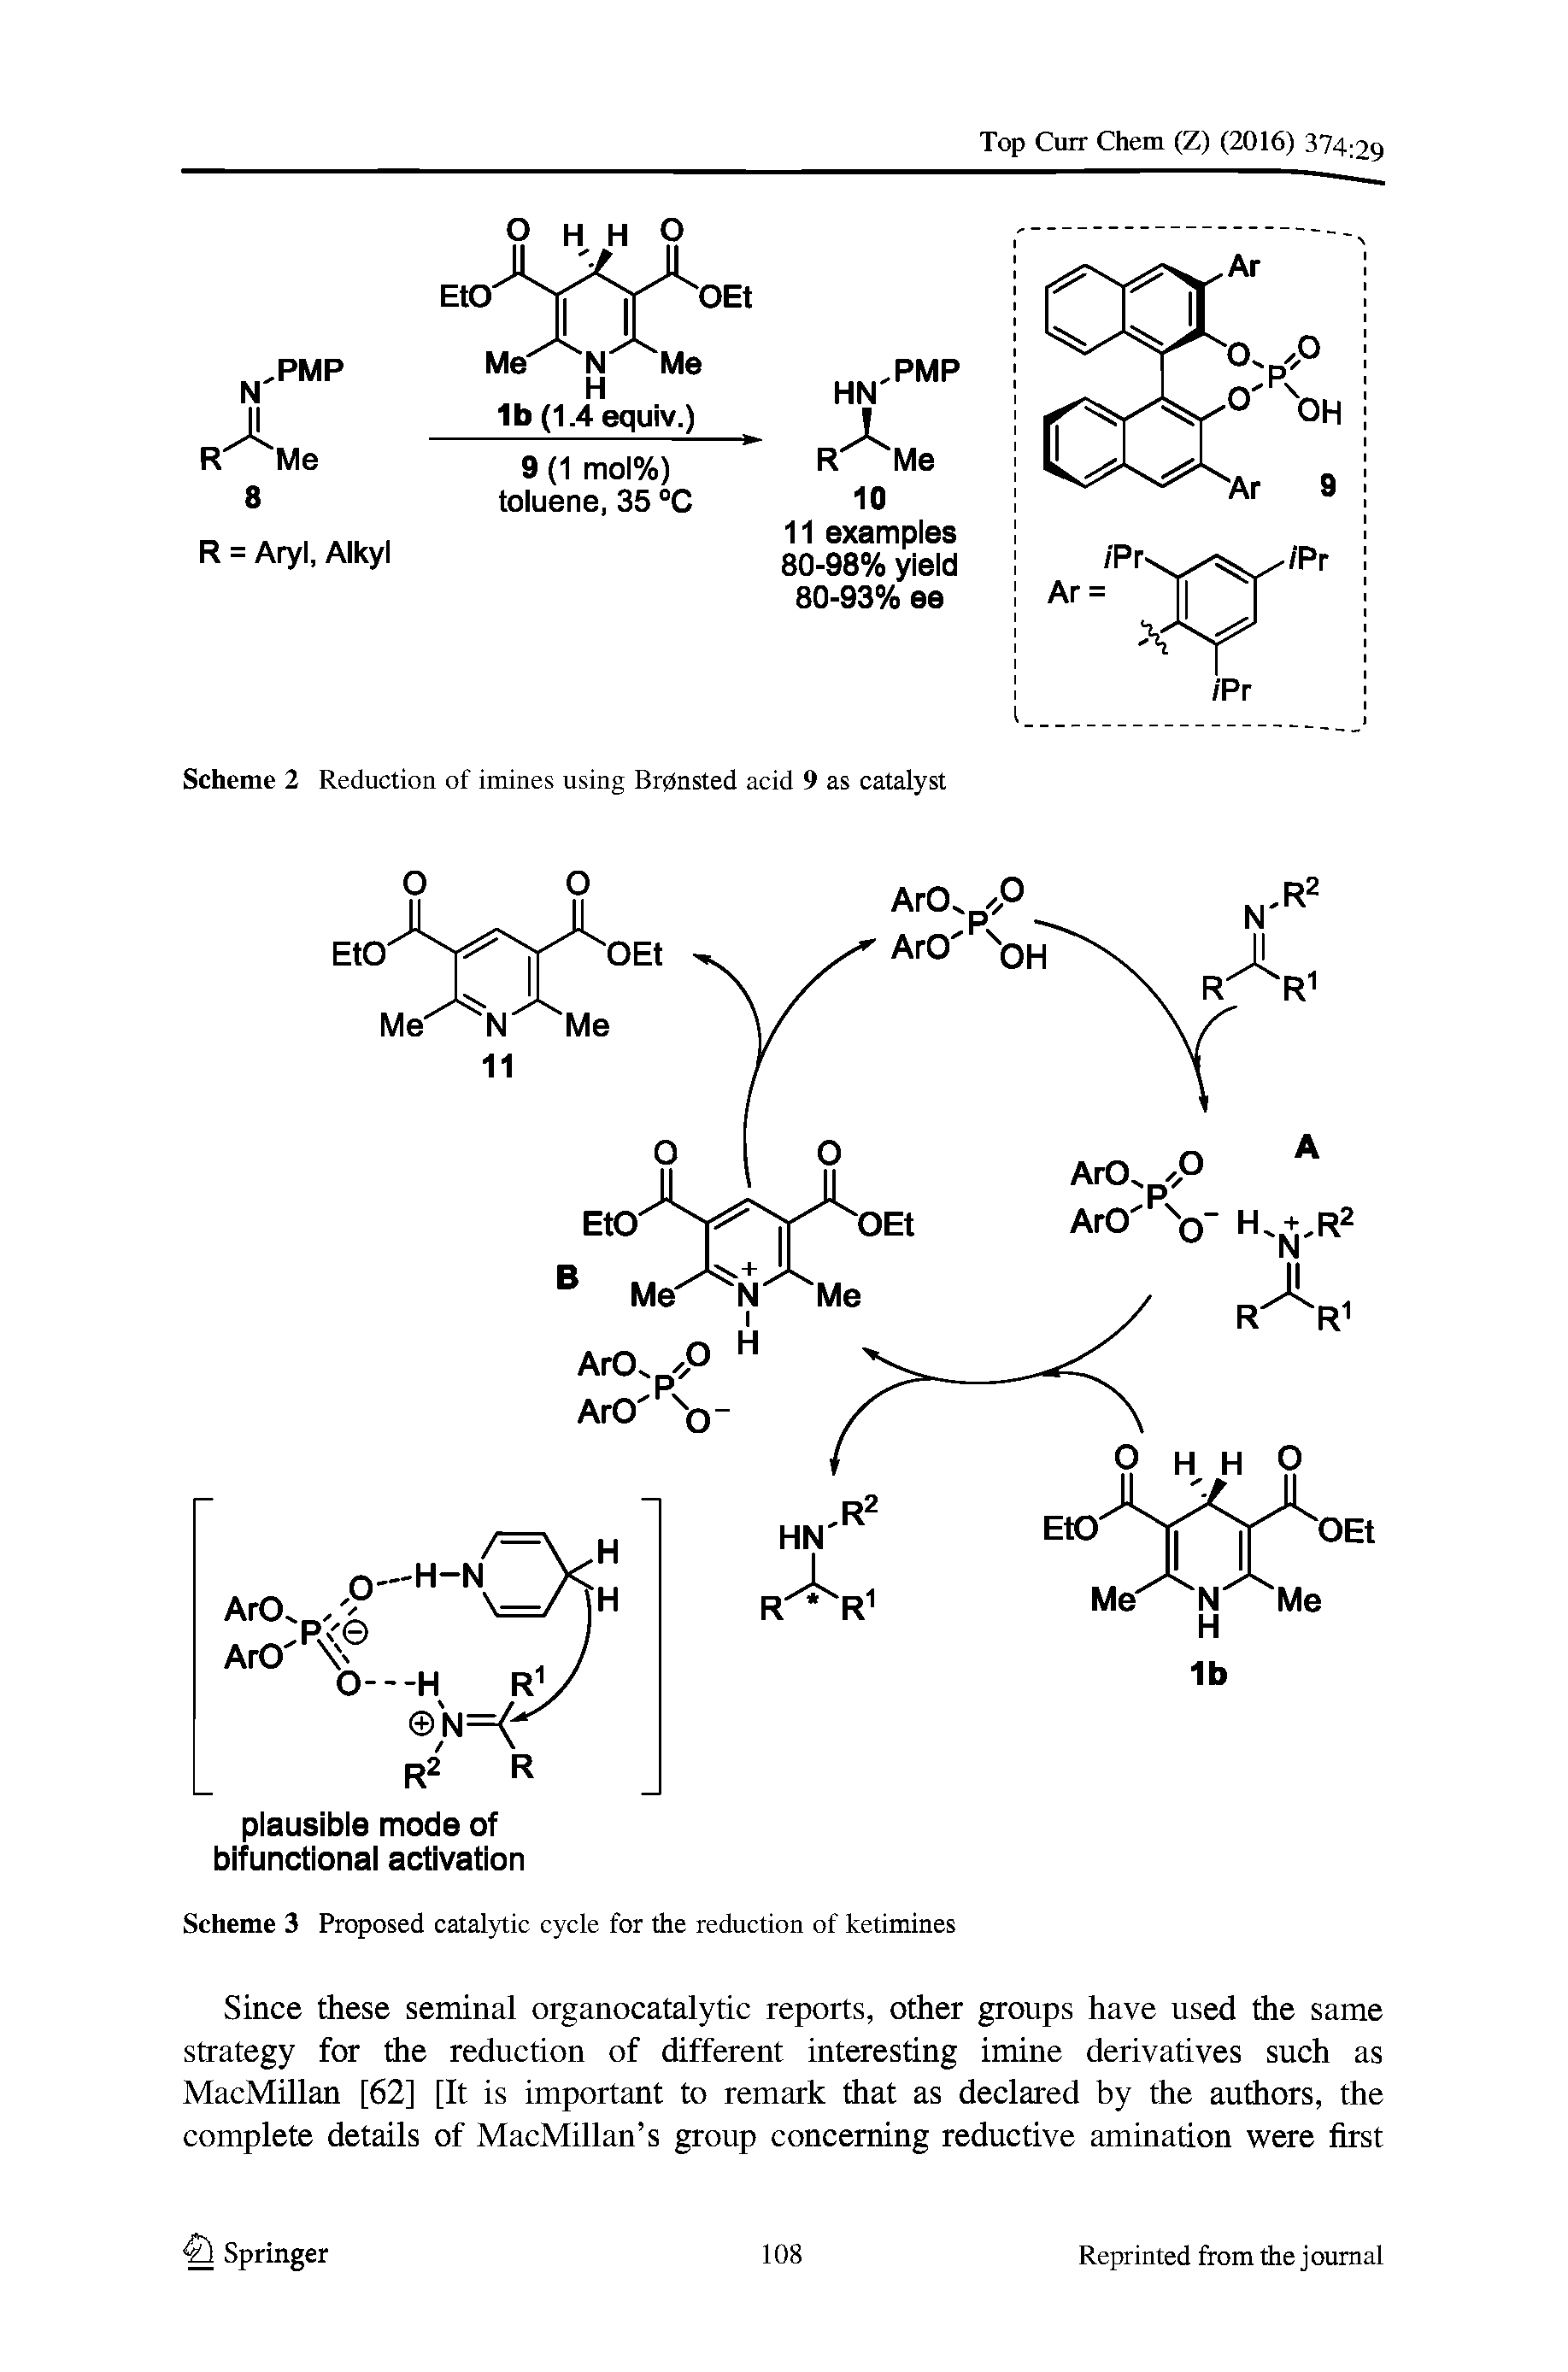 Scheme 3 Proposed catalytic cycle for the reduction of ketimines...